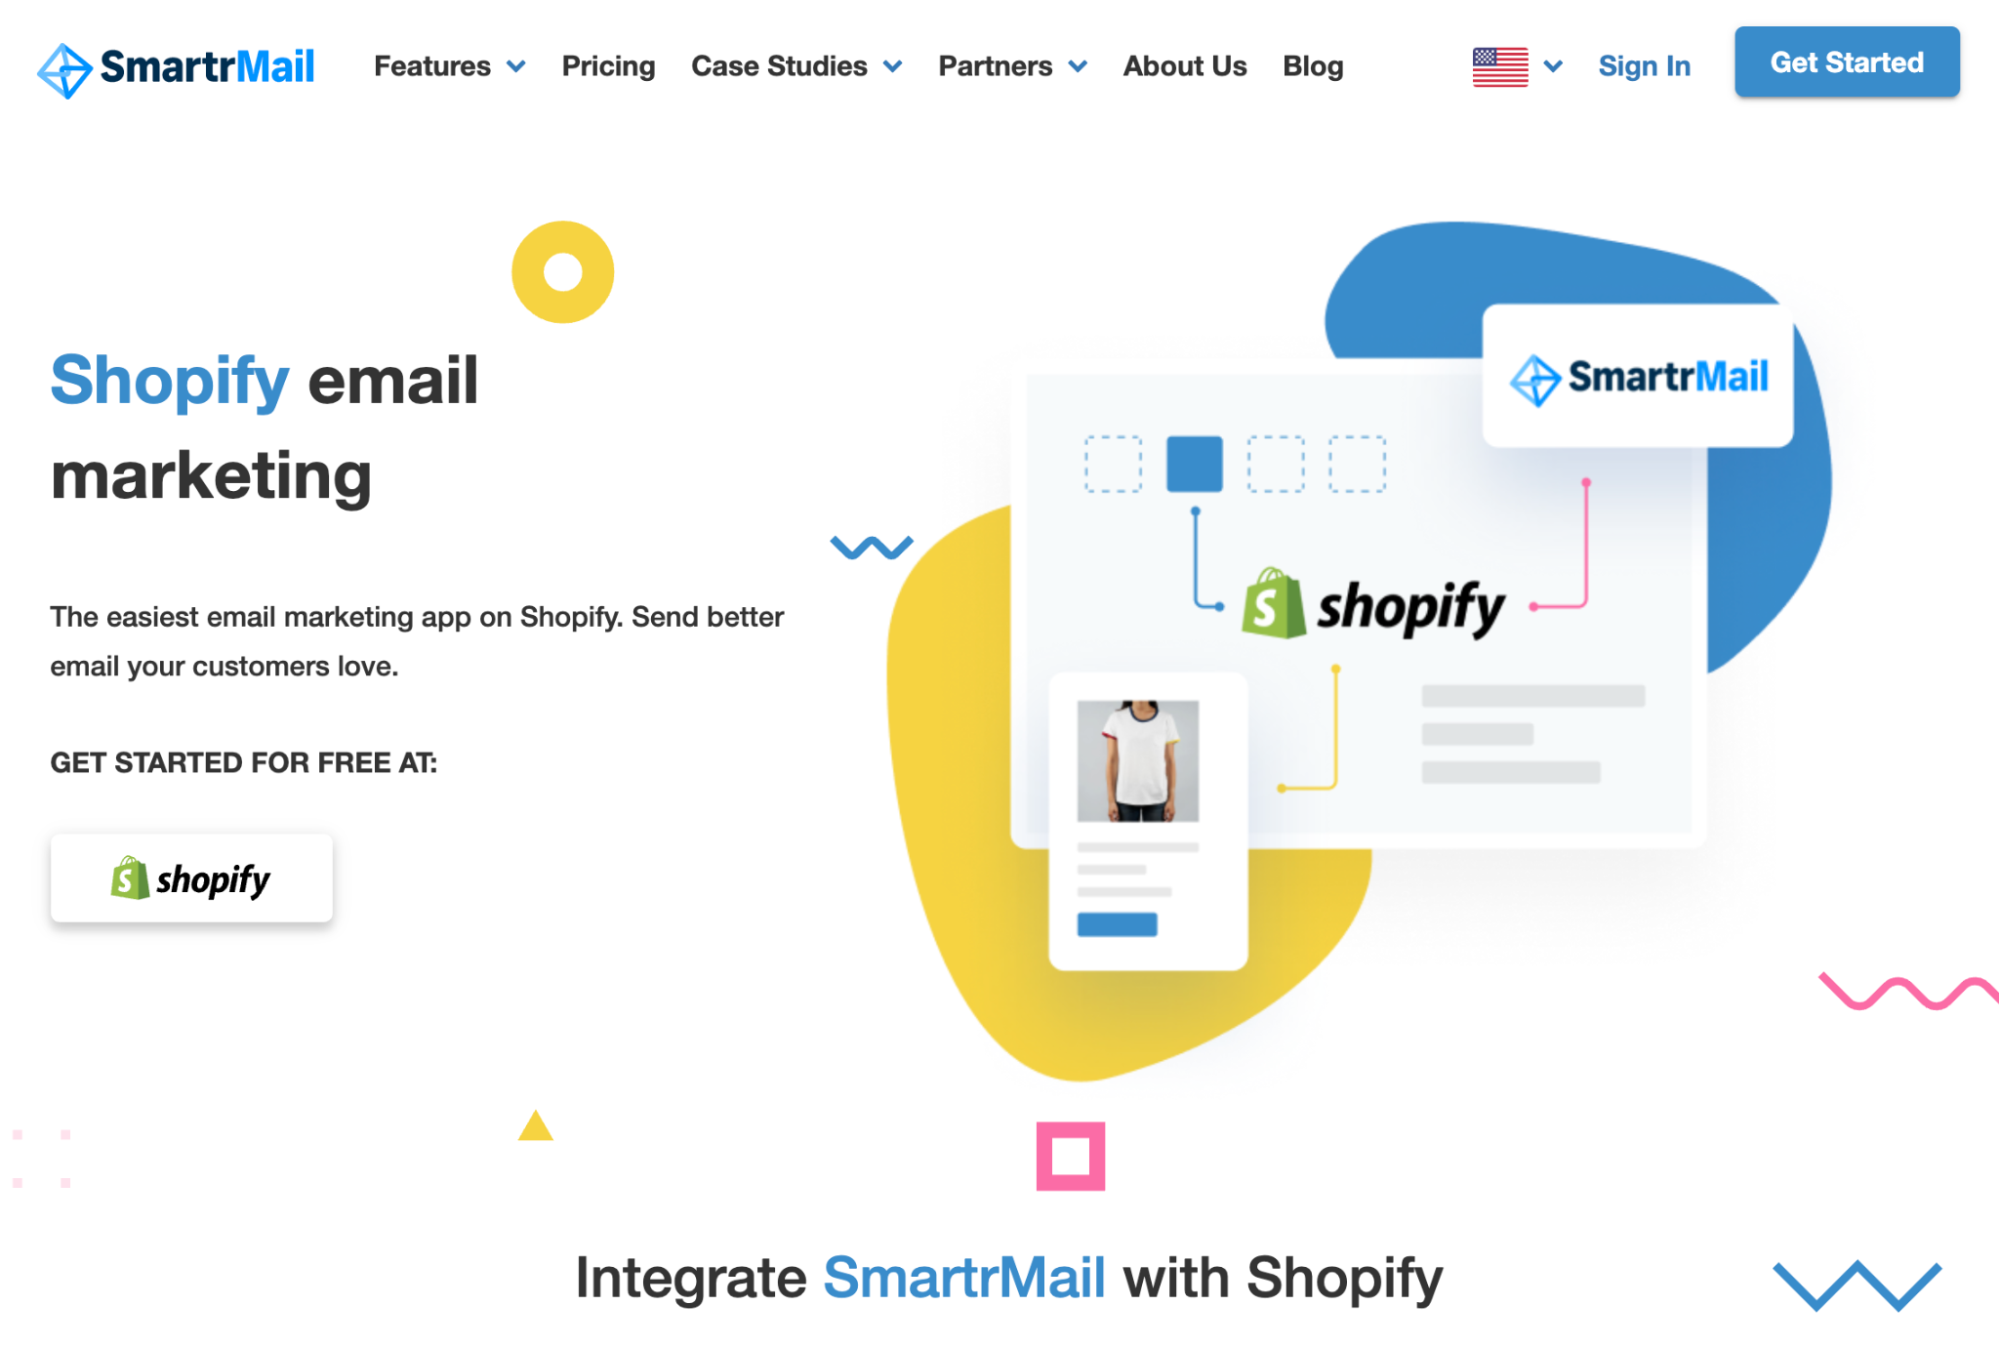 smartrmail email marketing service provider